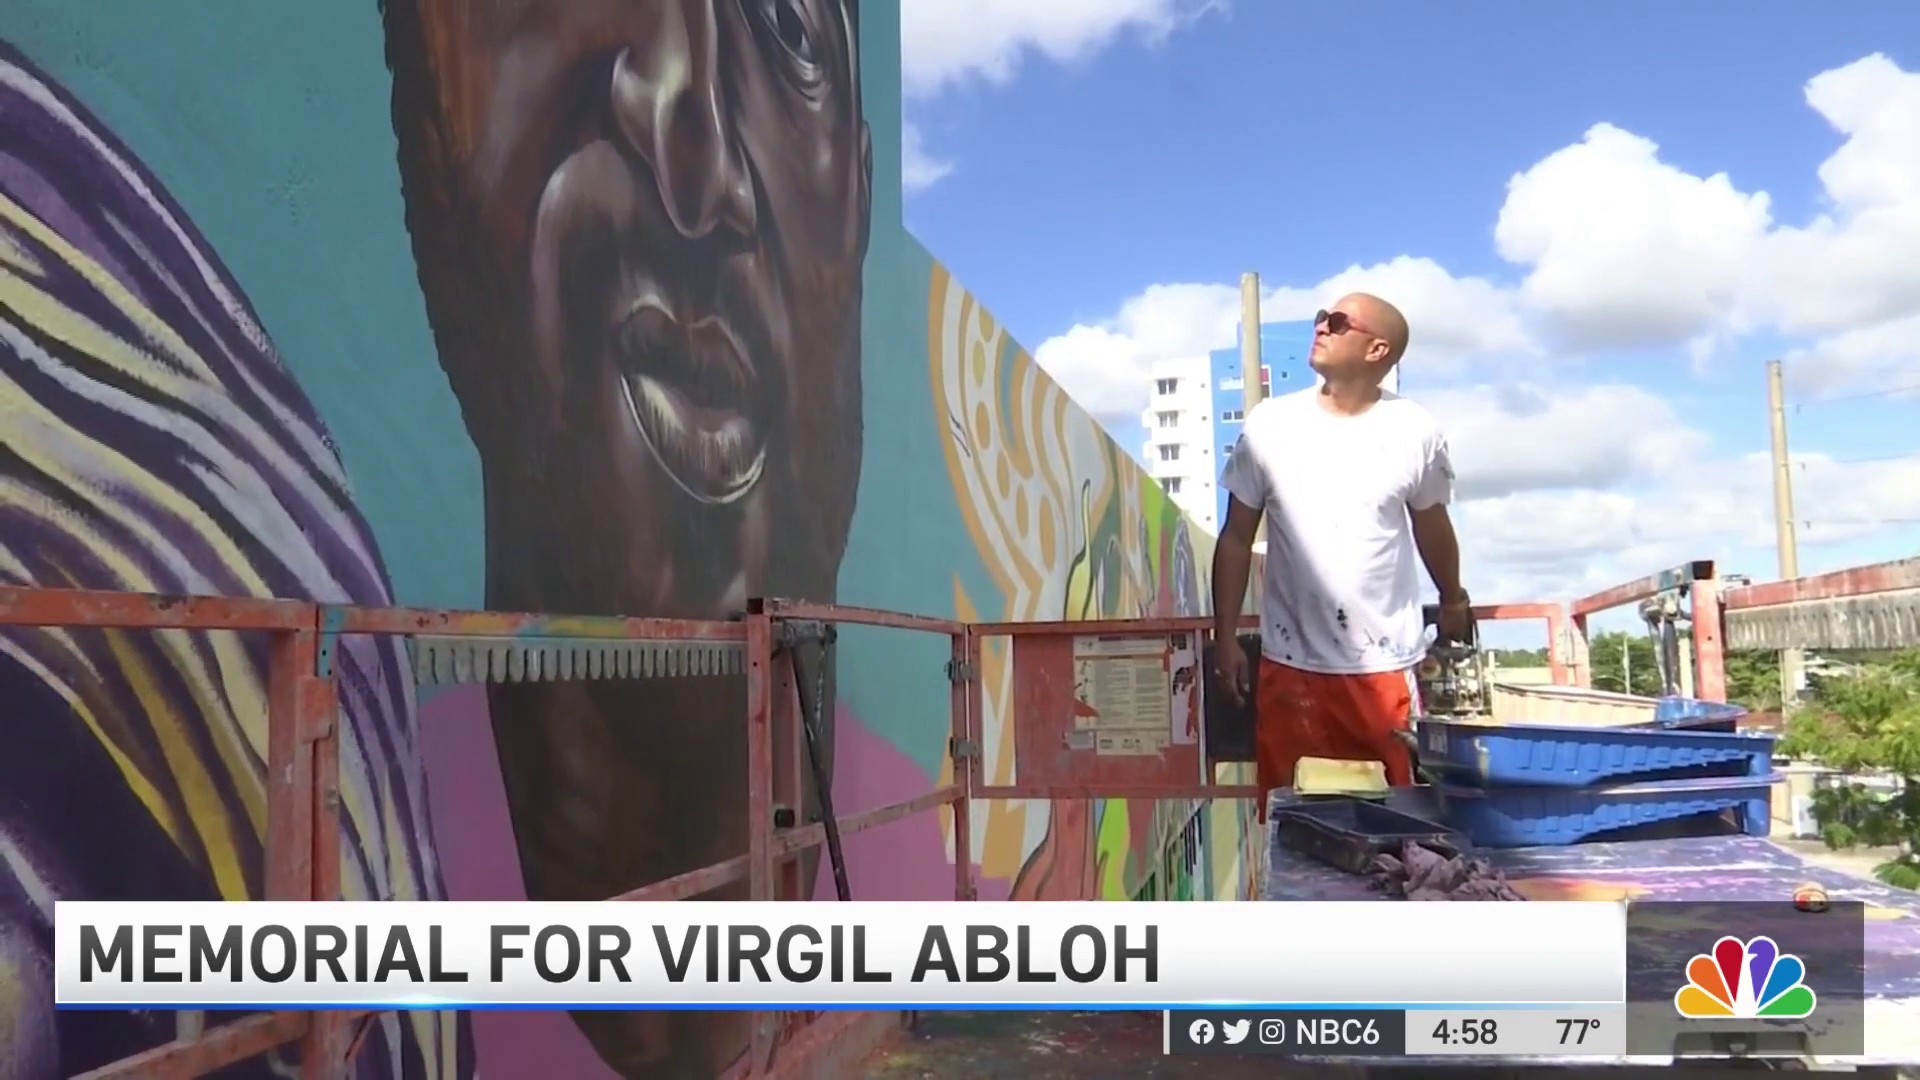 Video of the Month, homage to Virgil Abloh